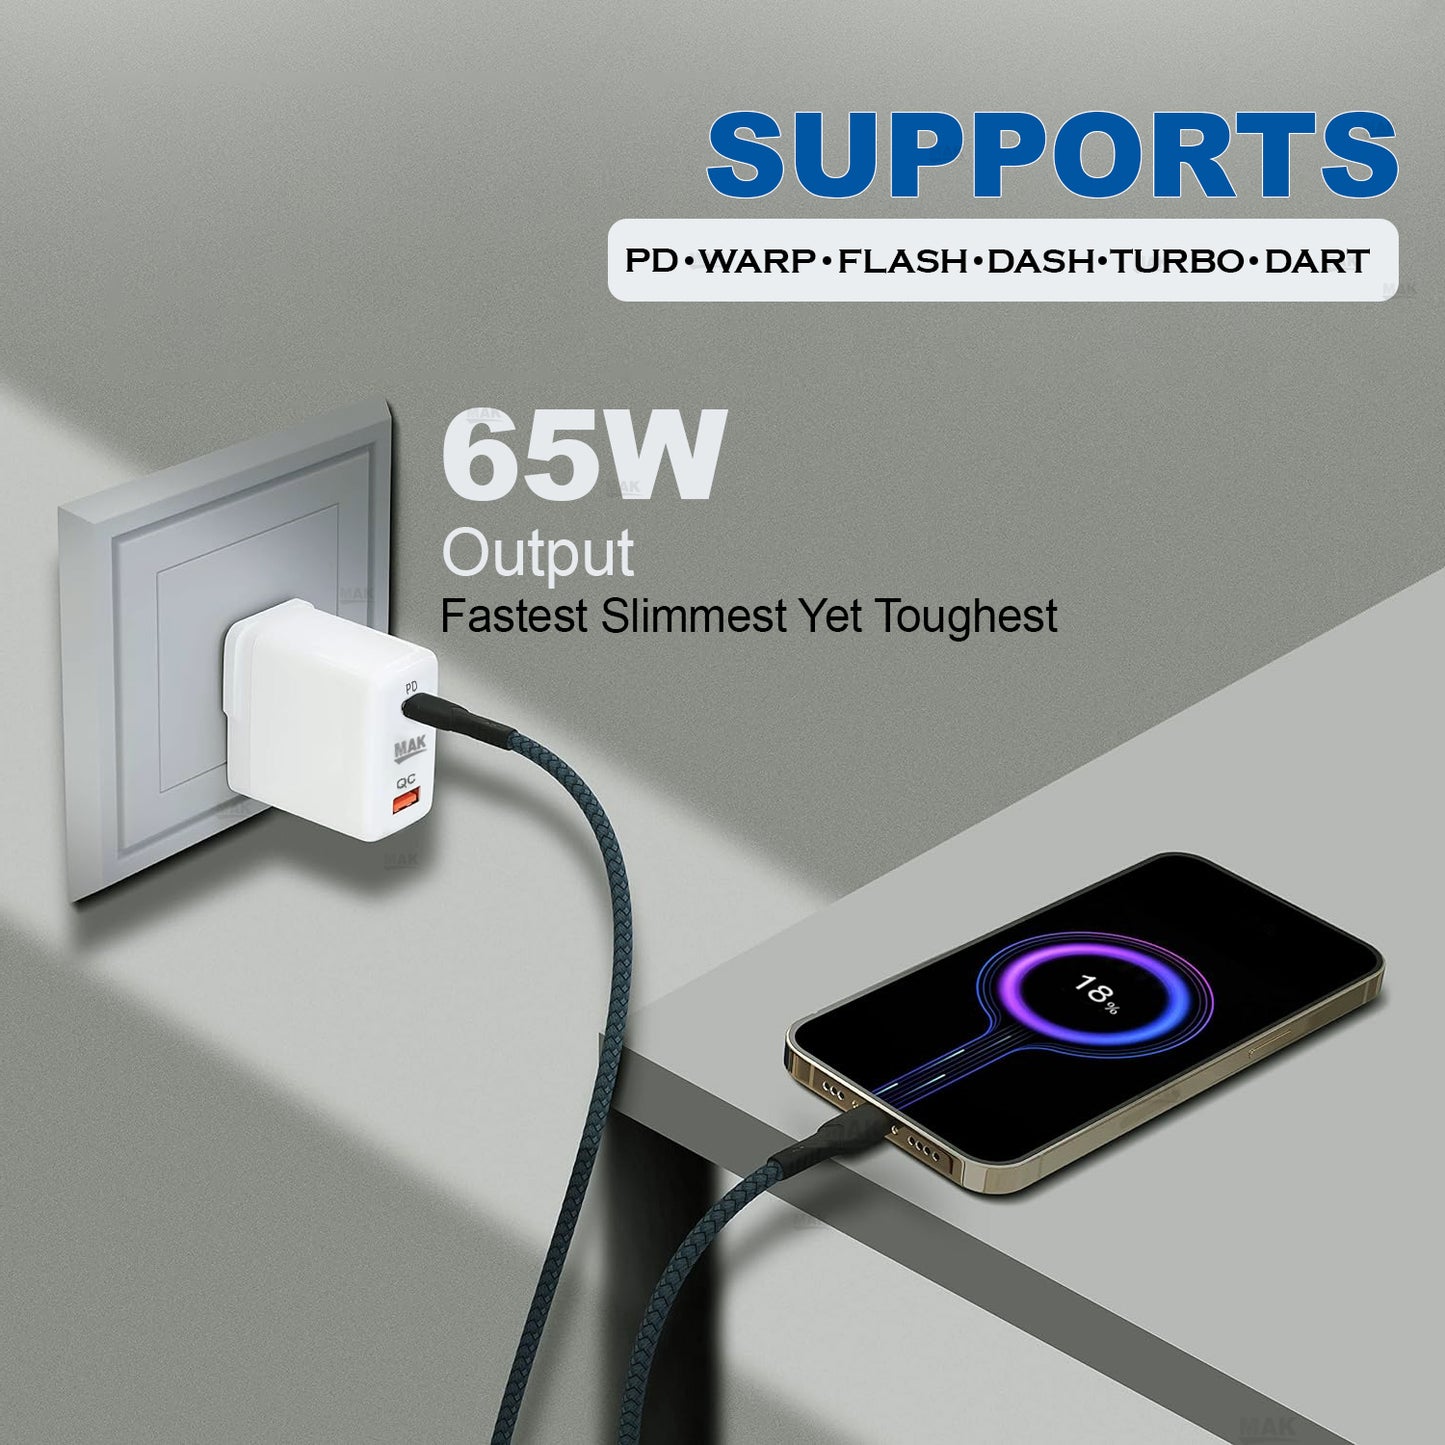 65W Dual Port Type C/USB Adapter, Fast Charging Power Adaptor for All iOS & Android Smartphone and Other Devices | Supports PD/Dash/Warp/SuperVooc/Dart Charging (Adapter Only)